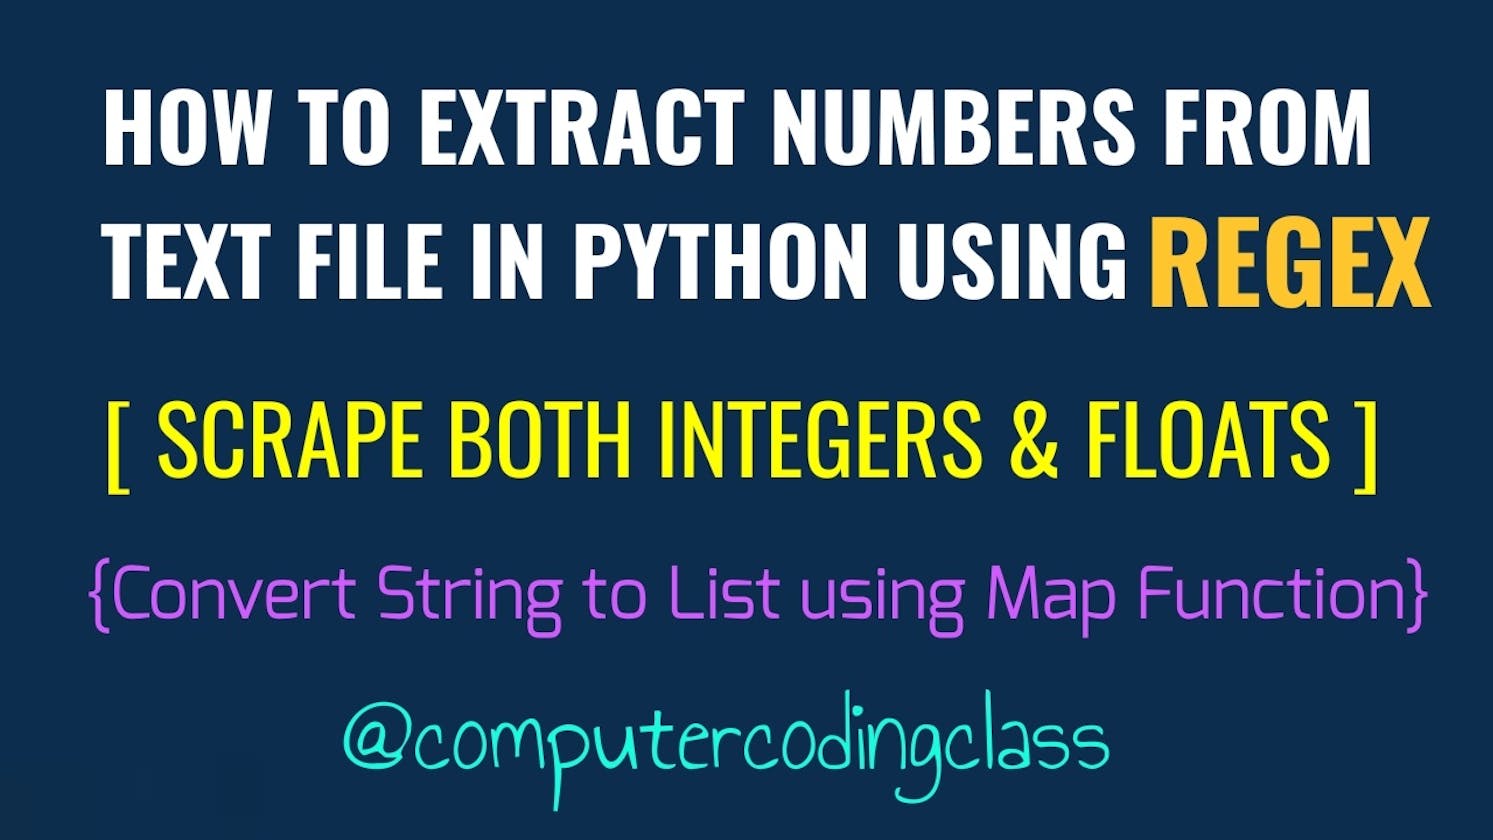 How to Extract Digits from a String in Python